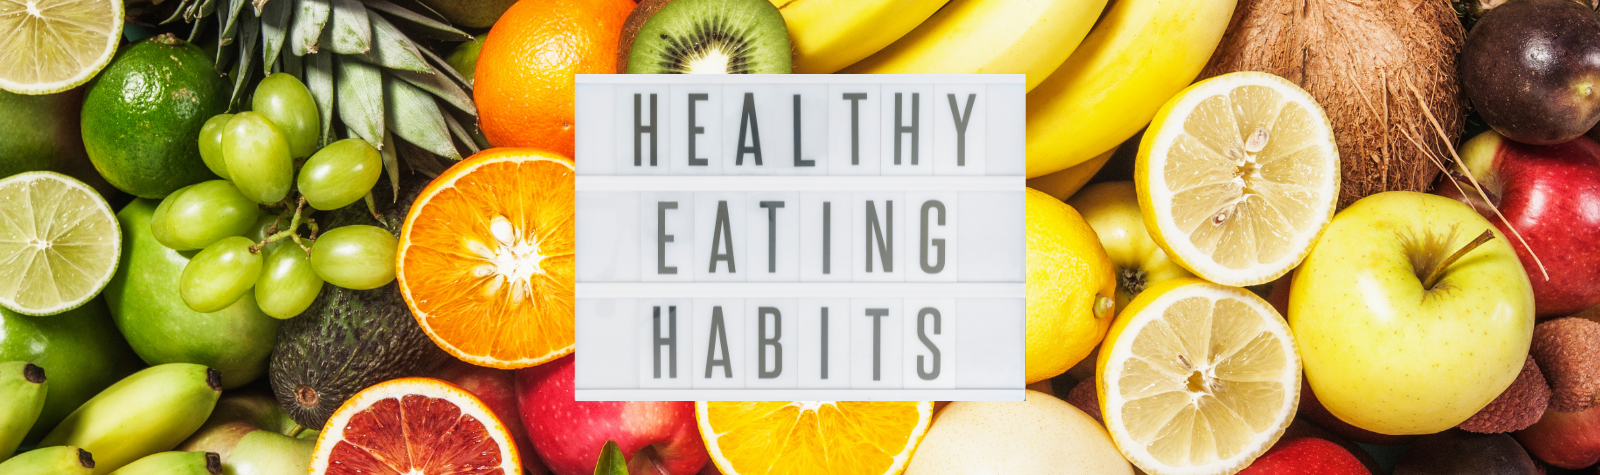 9 Tips to Maintain Healthy Eating Habits for Life